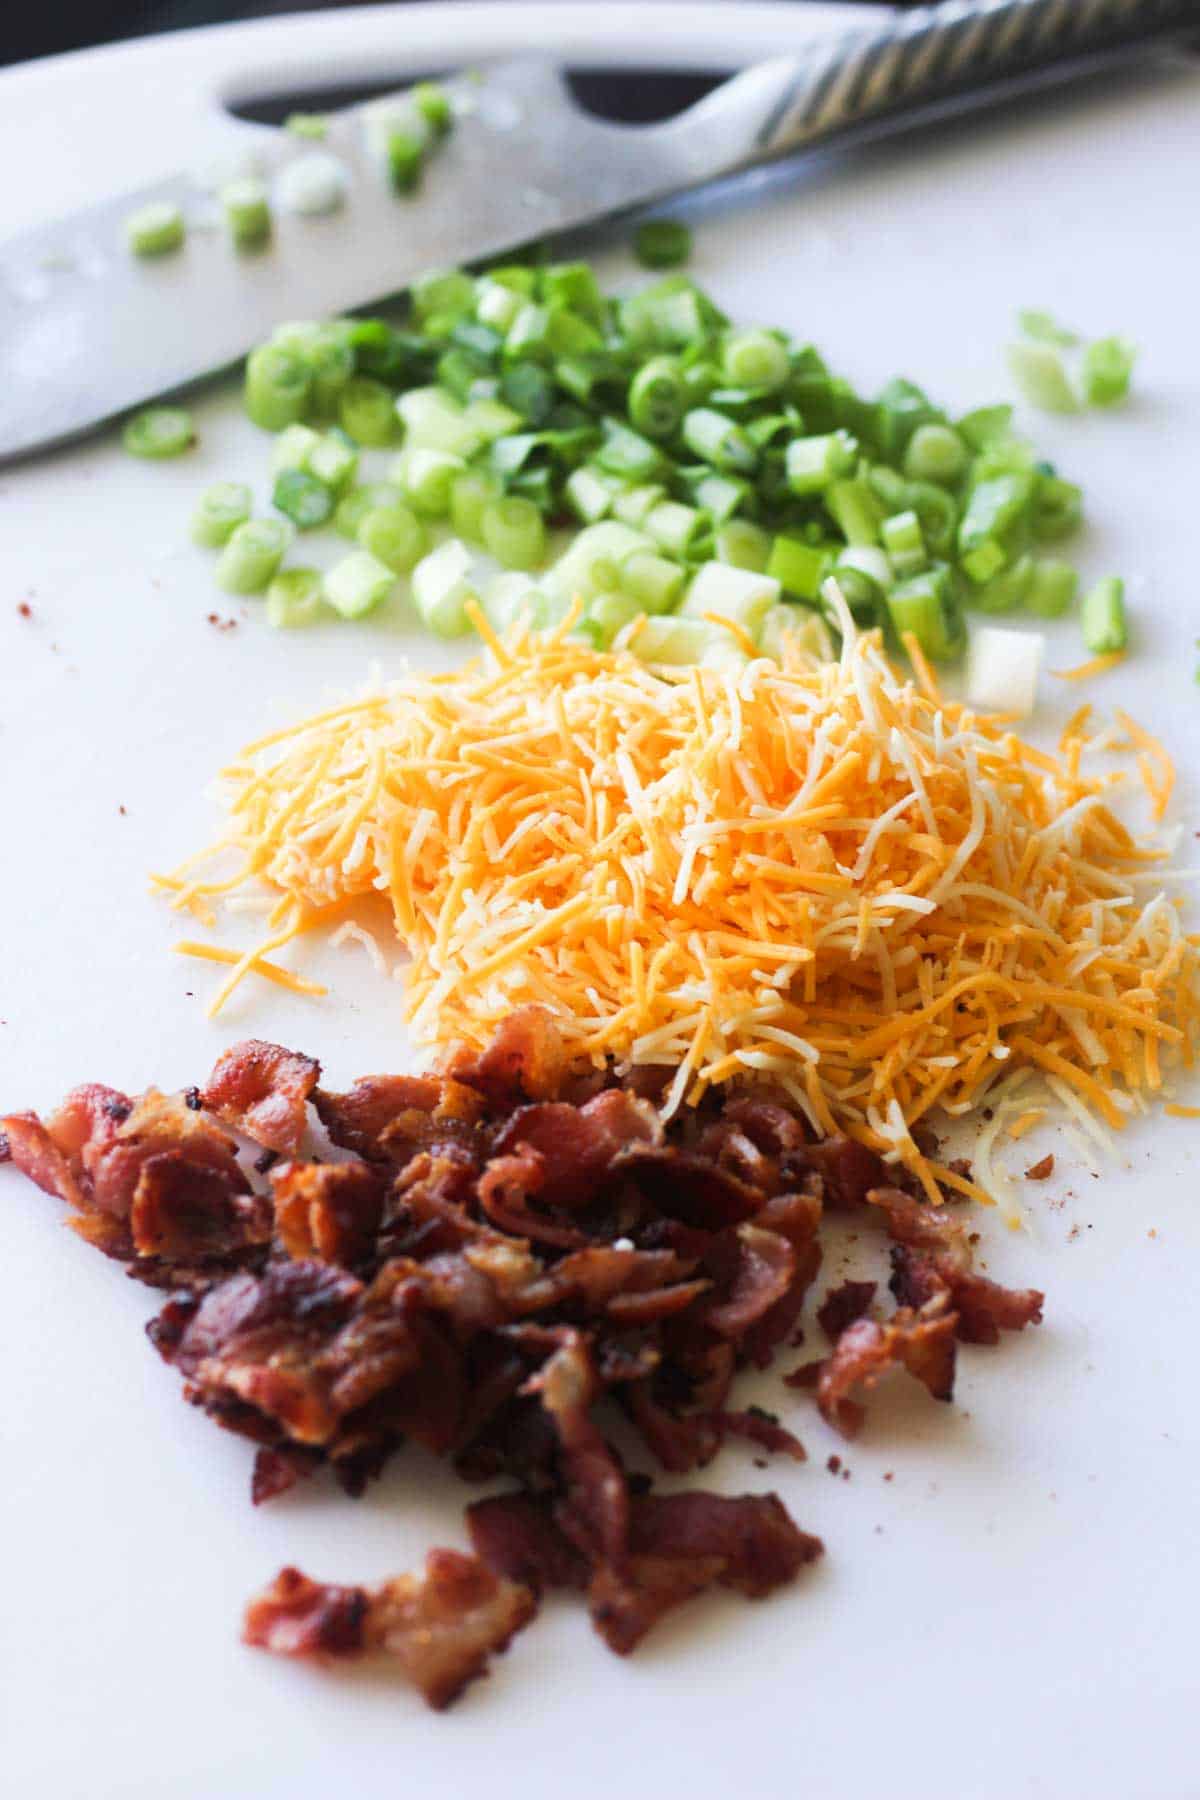 chopped green onions, bacon and shredded cheese